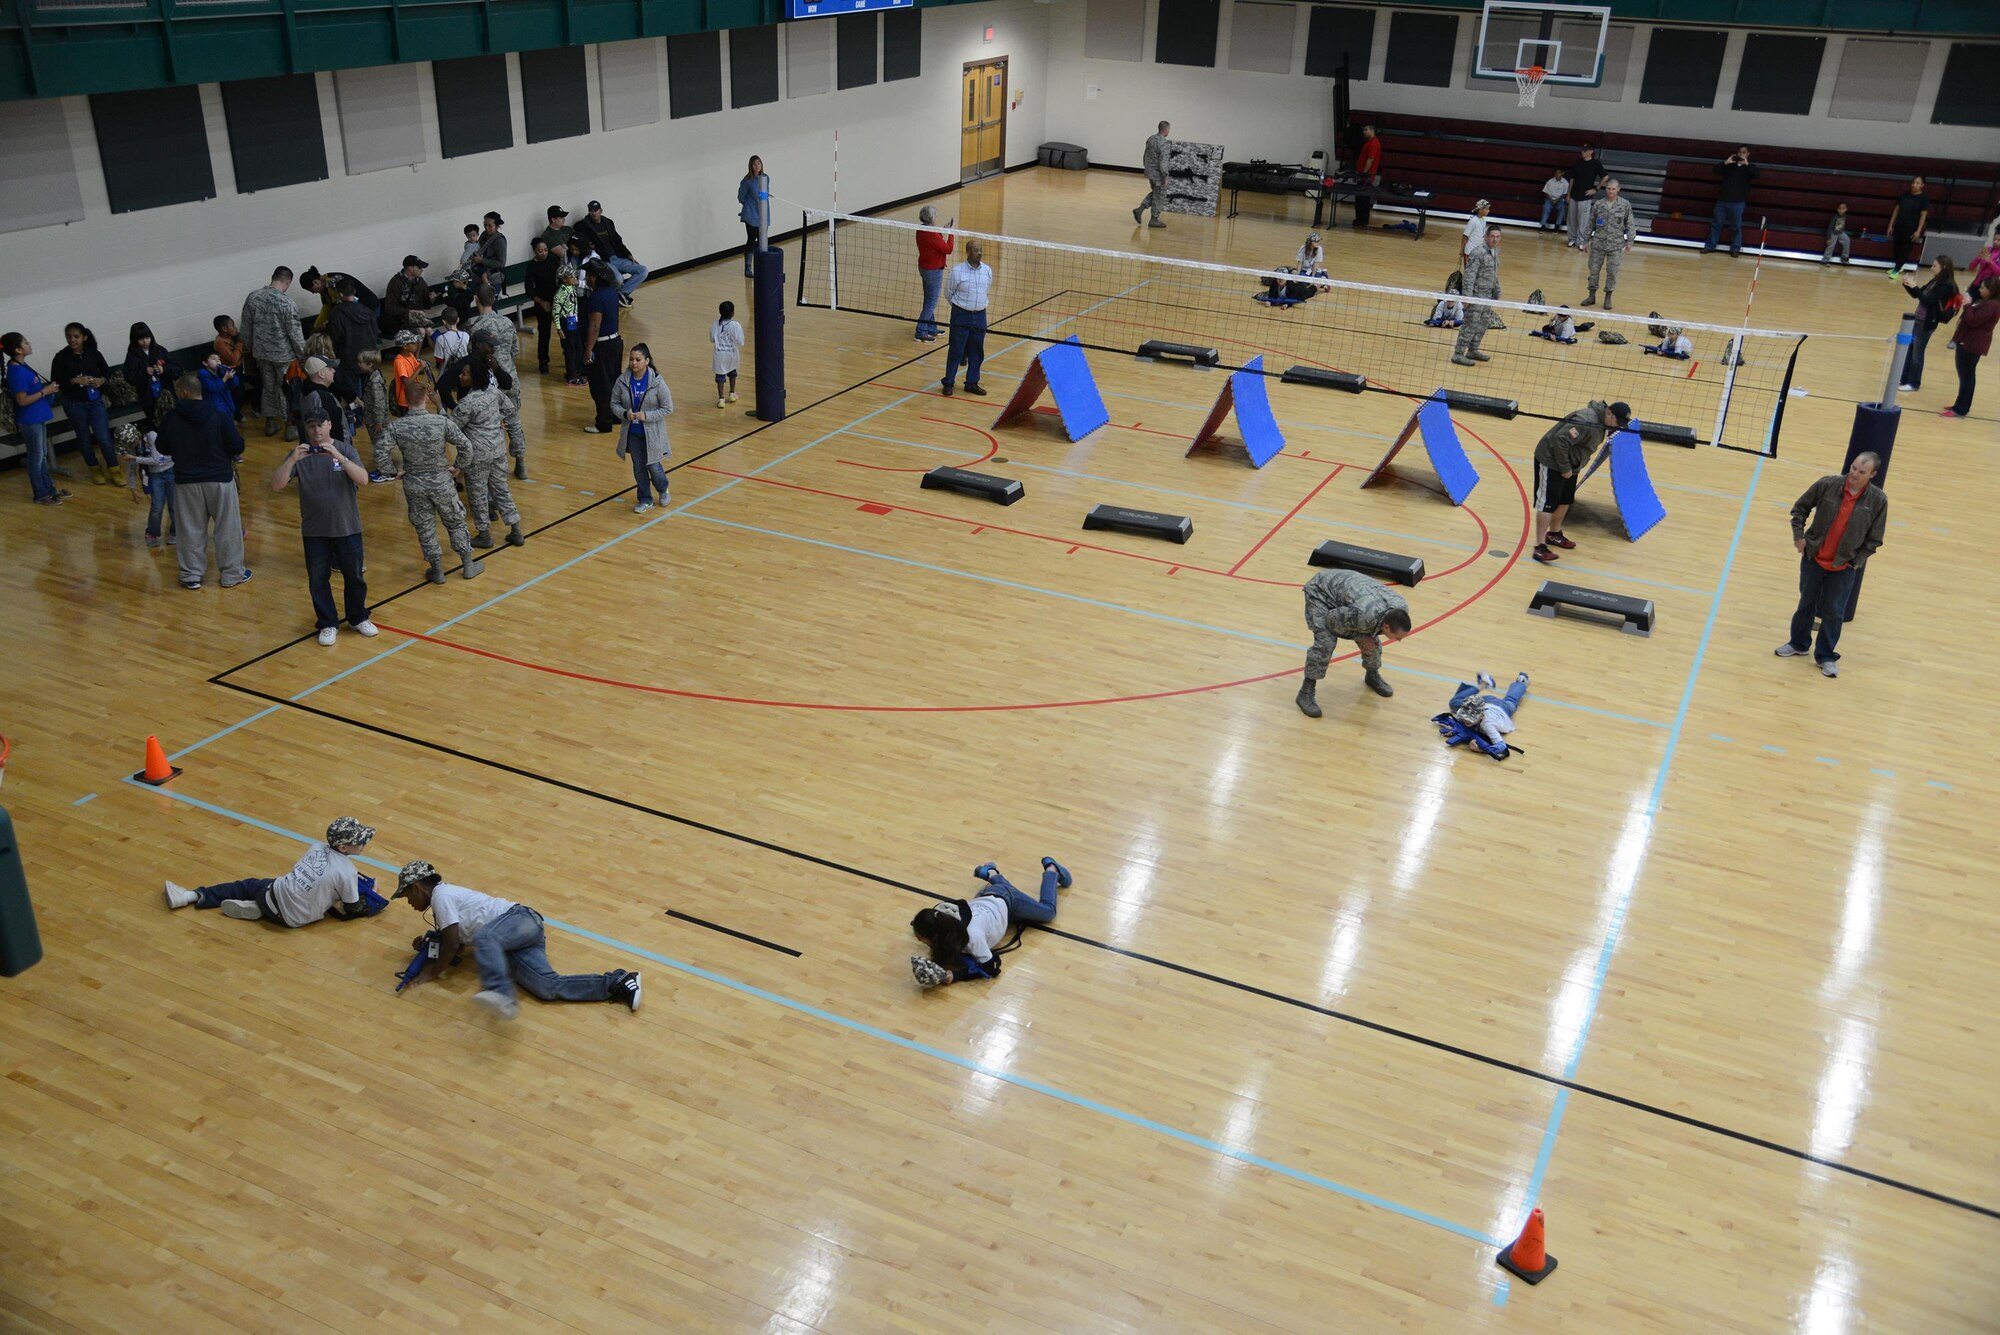 Military and local children complete an obstacle course at the Losano Fitness Center on Laughlin Air Force Base, Texas, Nov. 7, 2015. The mock deployment included various activities such as, out-processing with base agencies, learning basic customs and courtesies, obstacle courses and more. (U.S. Air Force photo by Airman 1st Class Ariel D. Partlow)